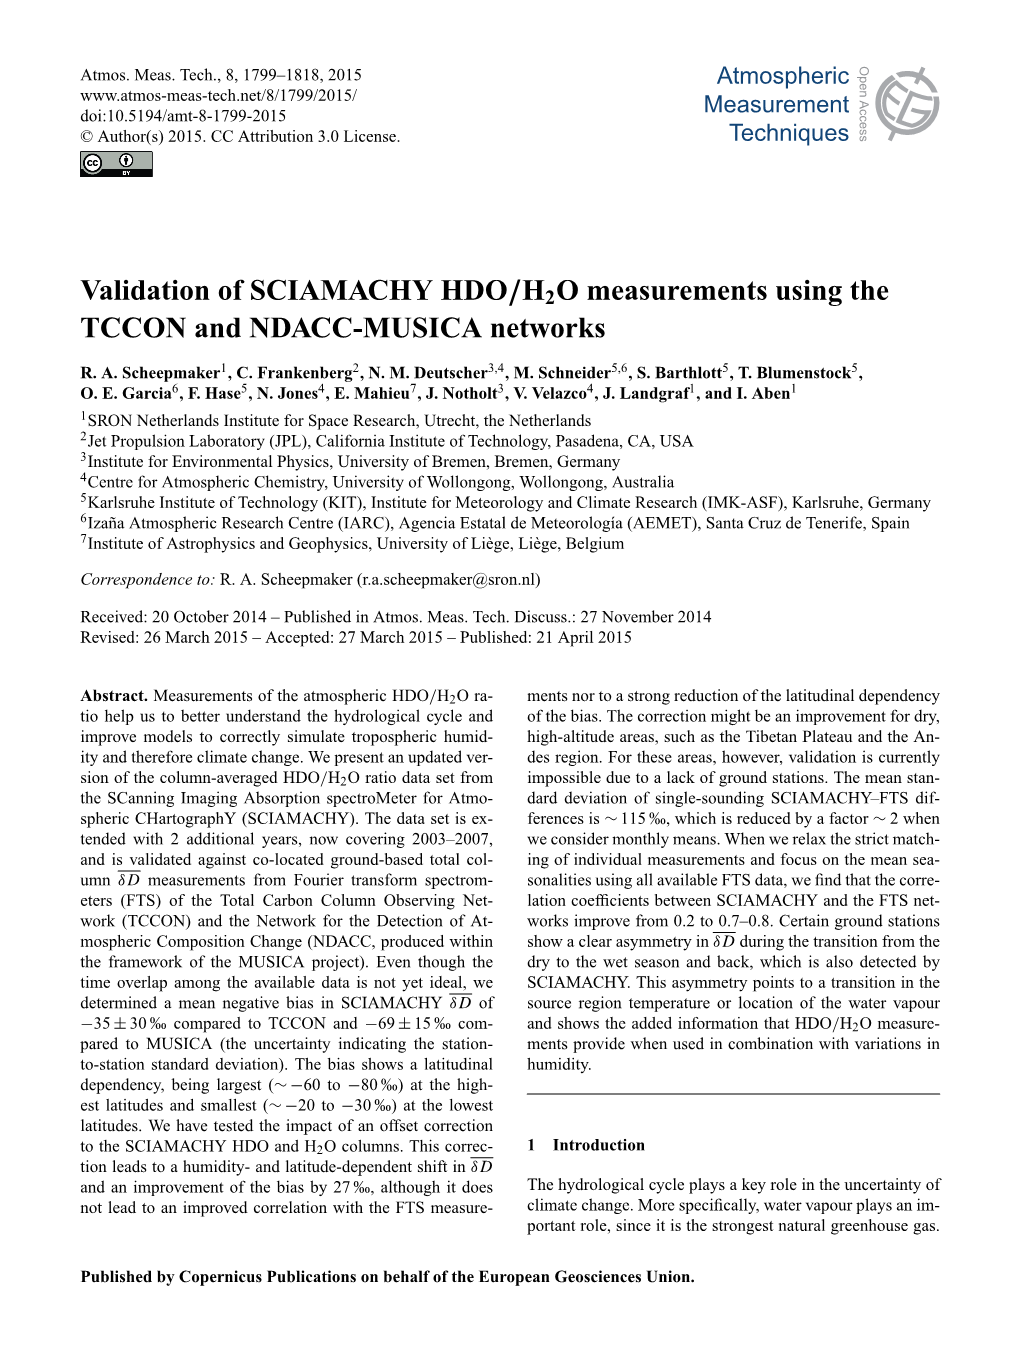 Validation of SCIAMACHY HDO/H2O Measurements Using the TCCON and NDACC-MUSICA Networks